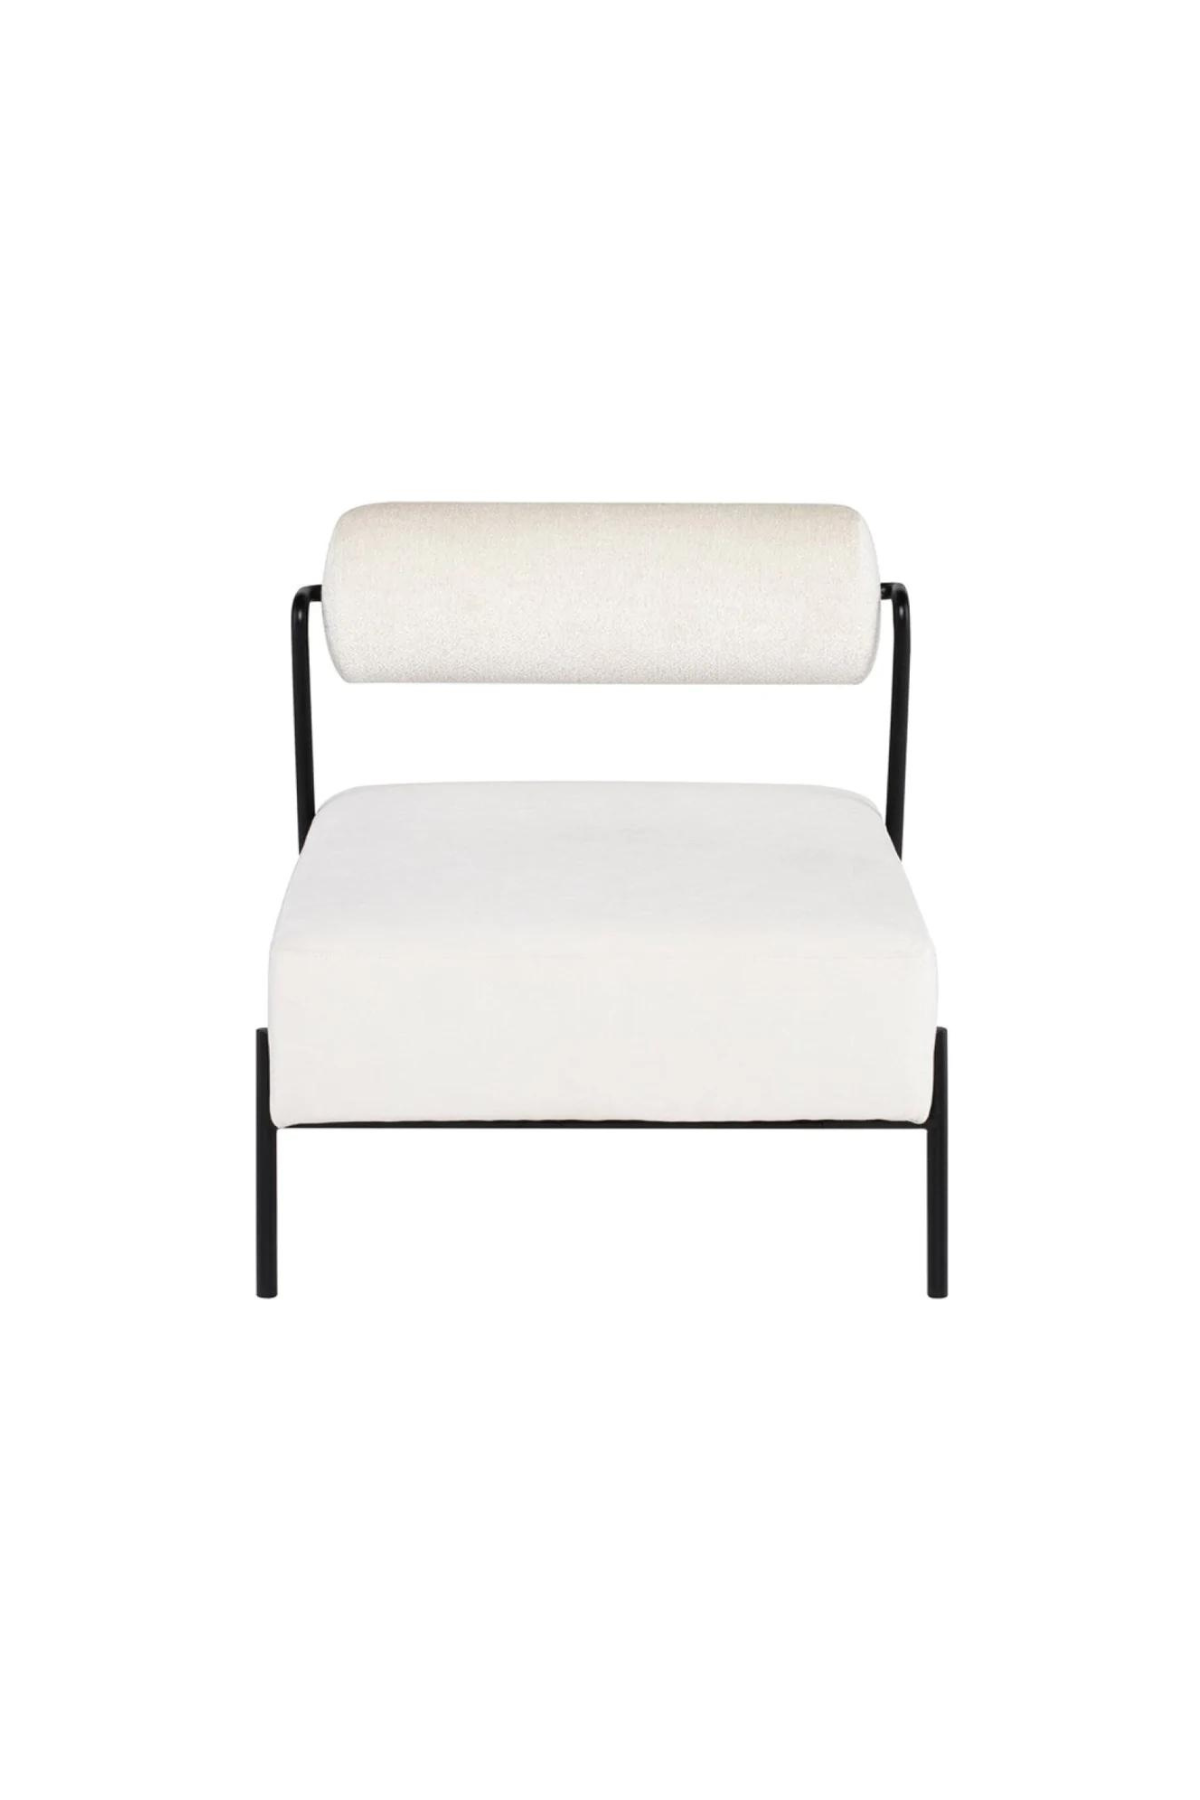 Marni Occasional Chair - Oyster